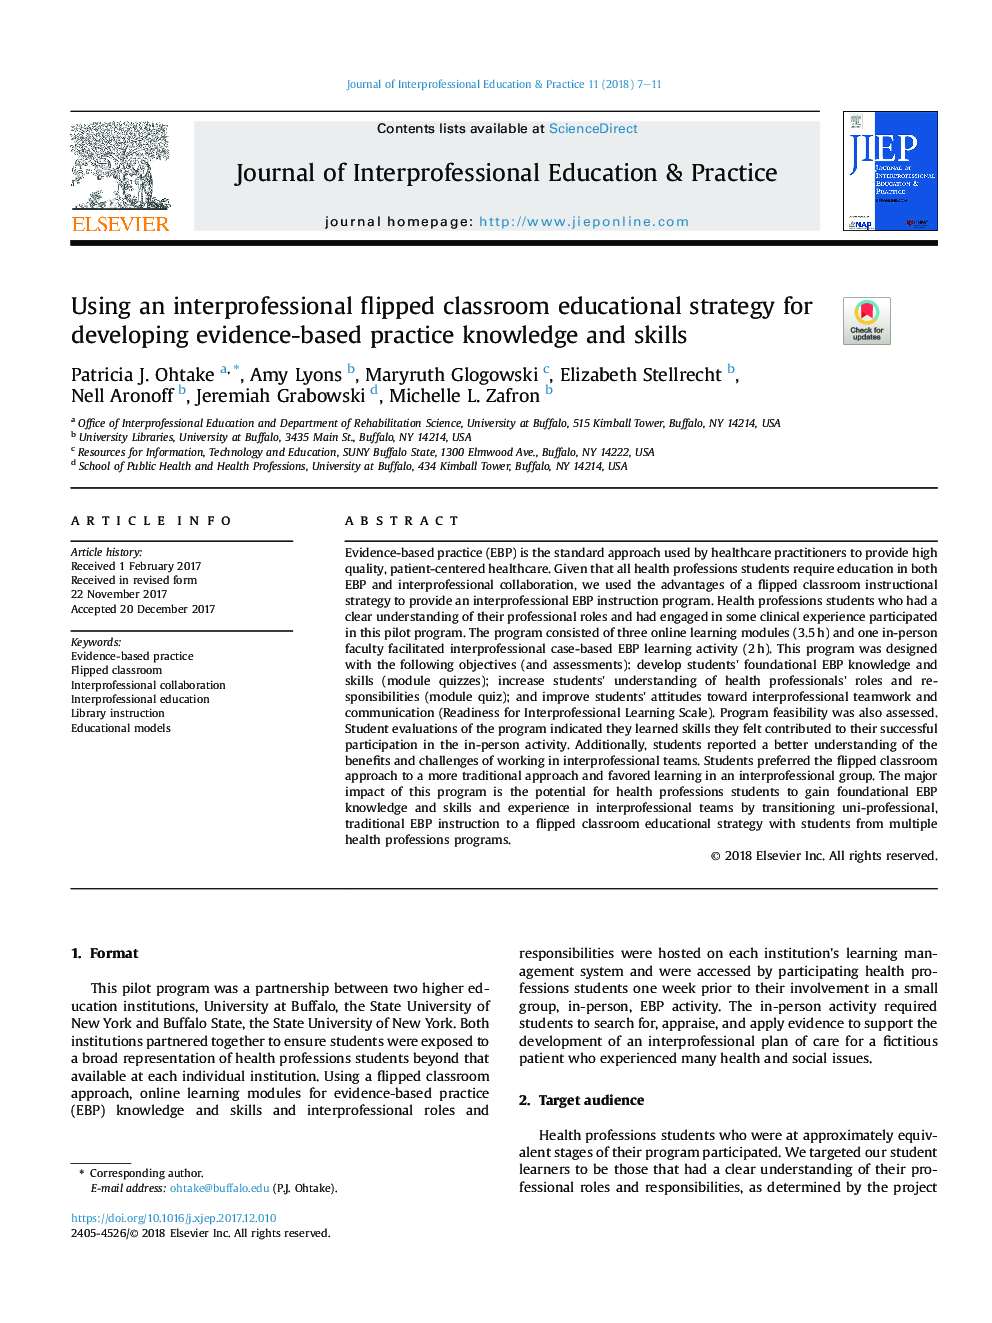 Using an interprofessional flipped classroom educational strategy for developing evidence-based practice knowledge and skills